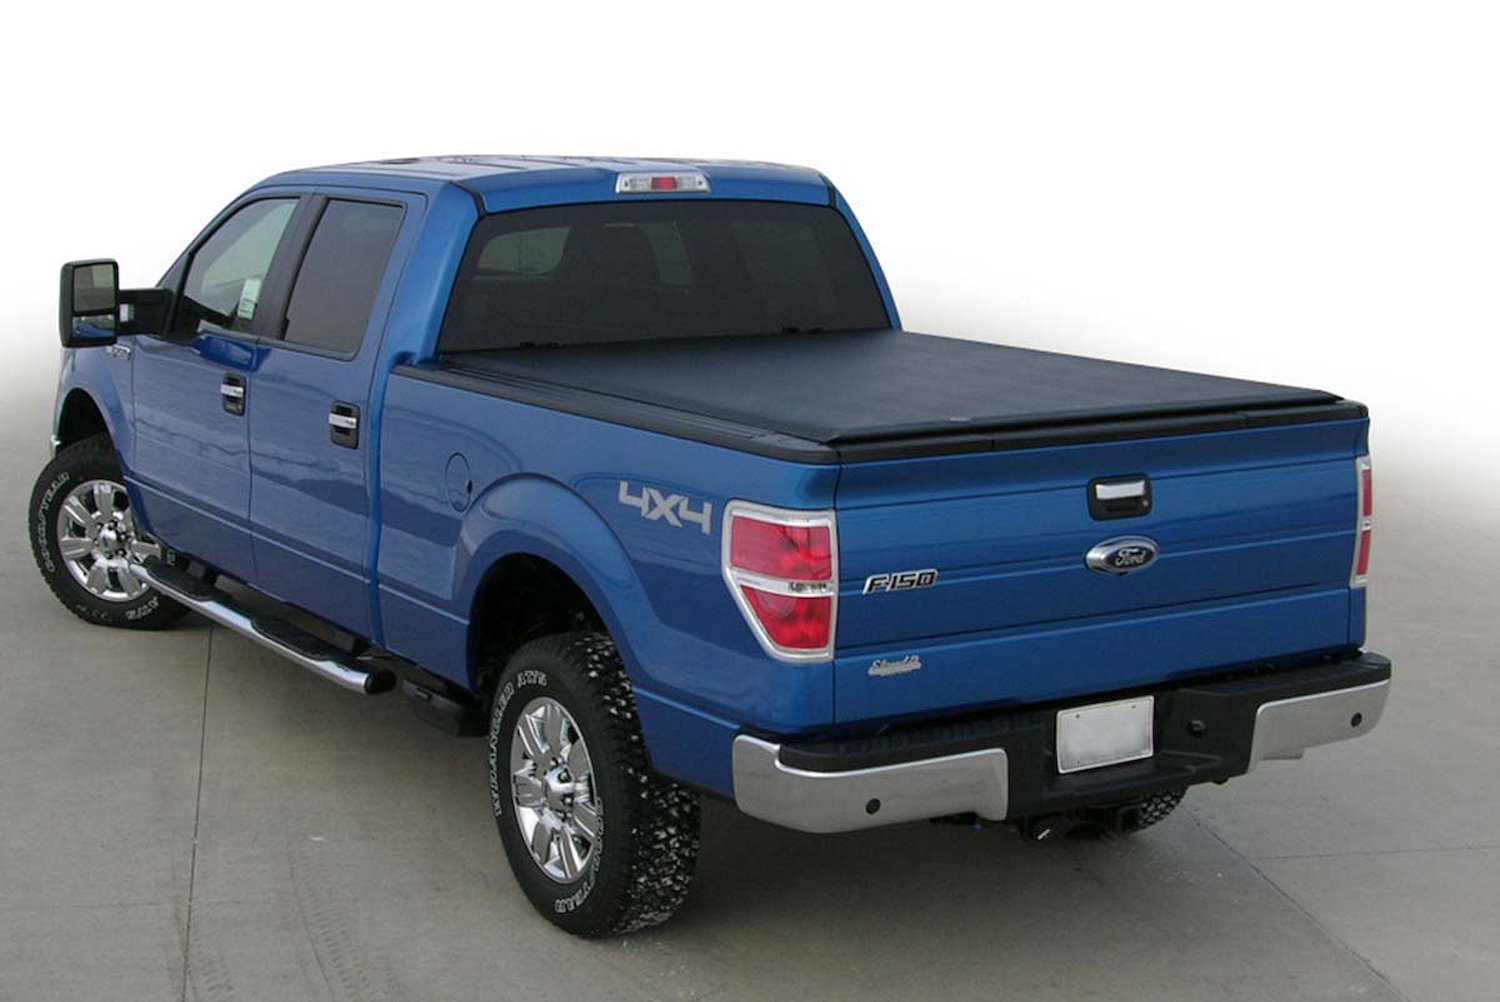 LORADO Roll-Up Tonneau Cover, Fits Select Toyota Tundra, with 6 ft. 6 in. Bed